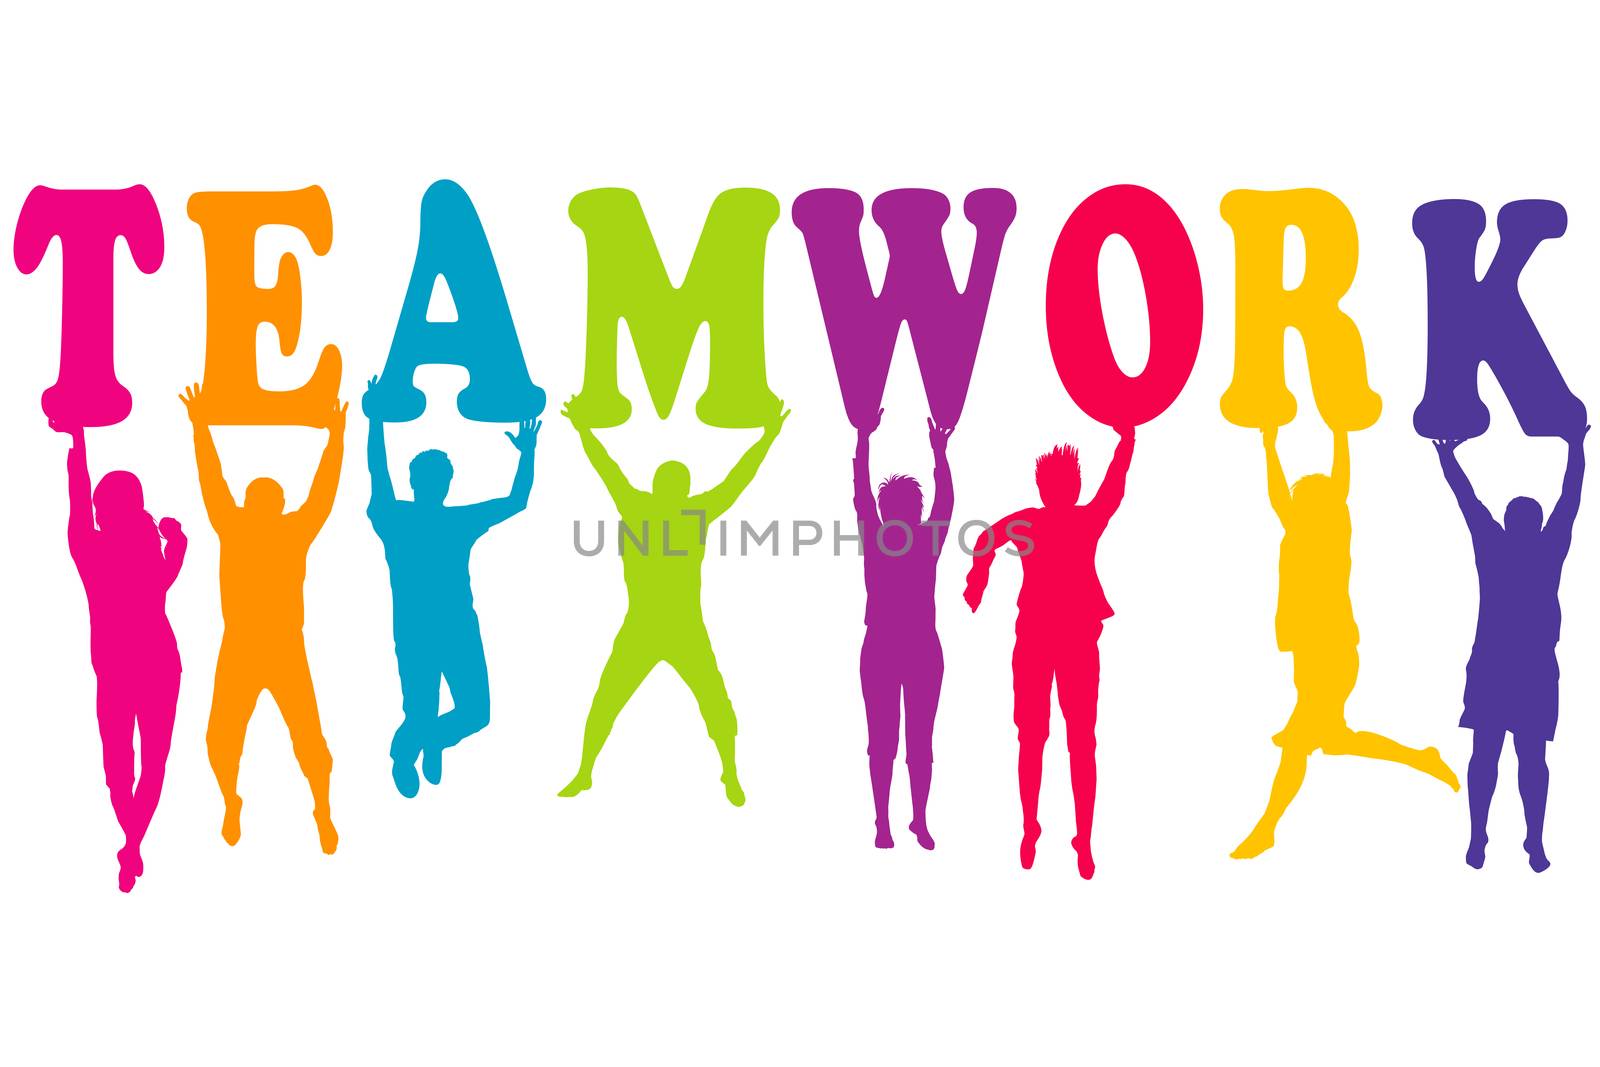 Teamwork concept with colored women and men silhouettes jumping